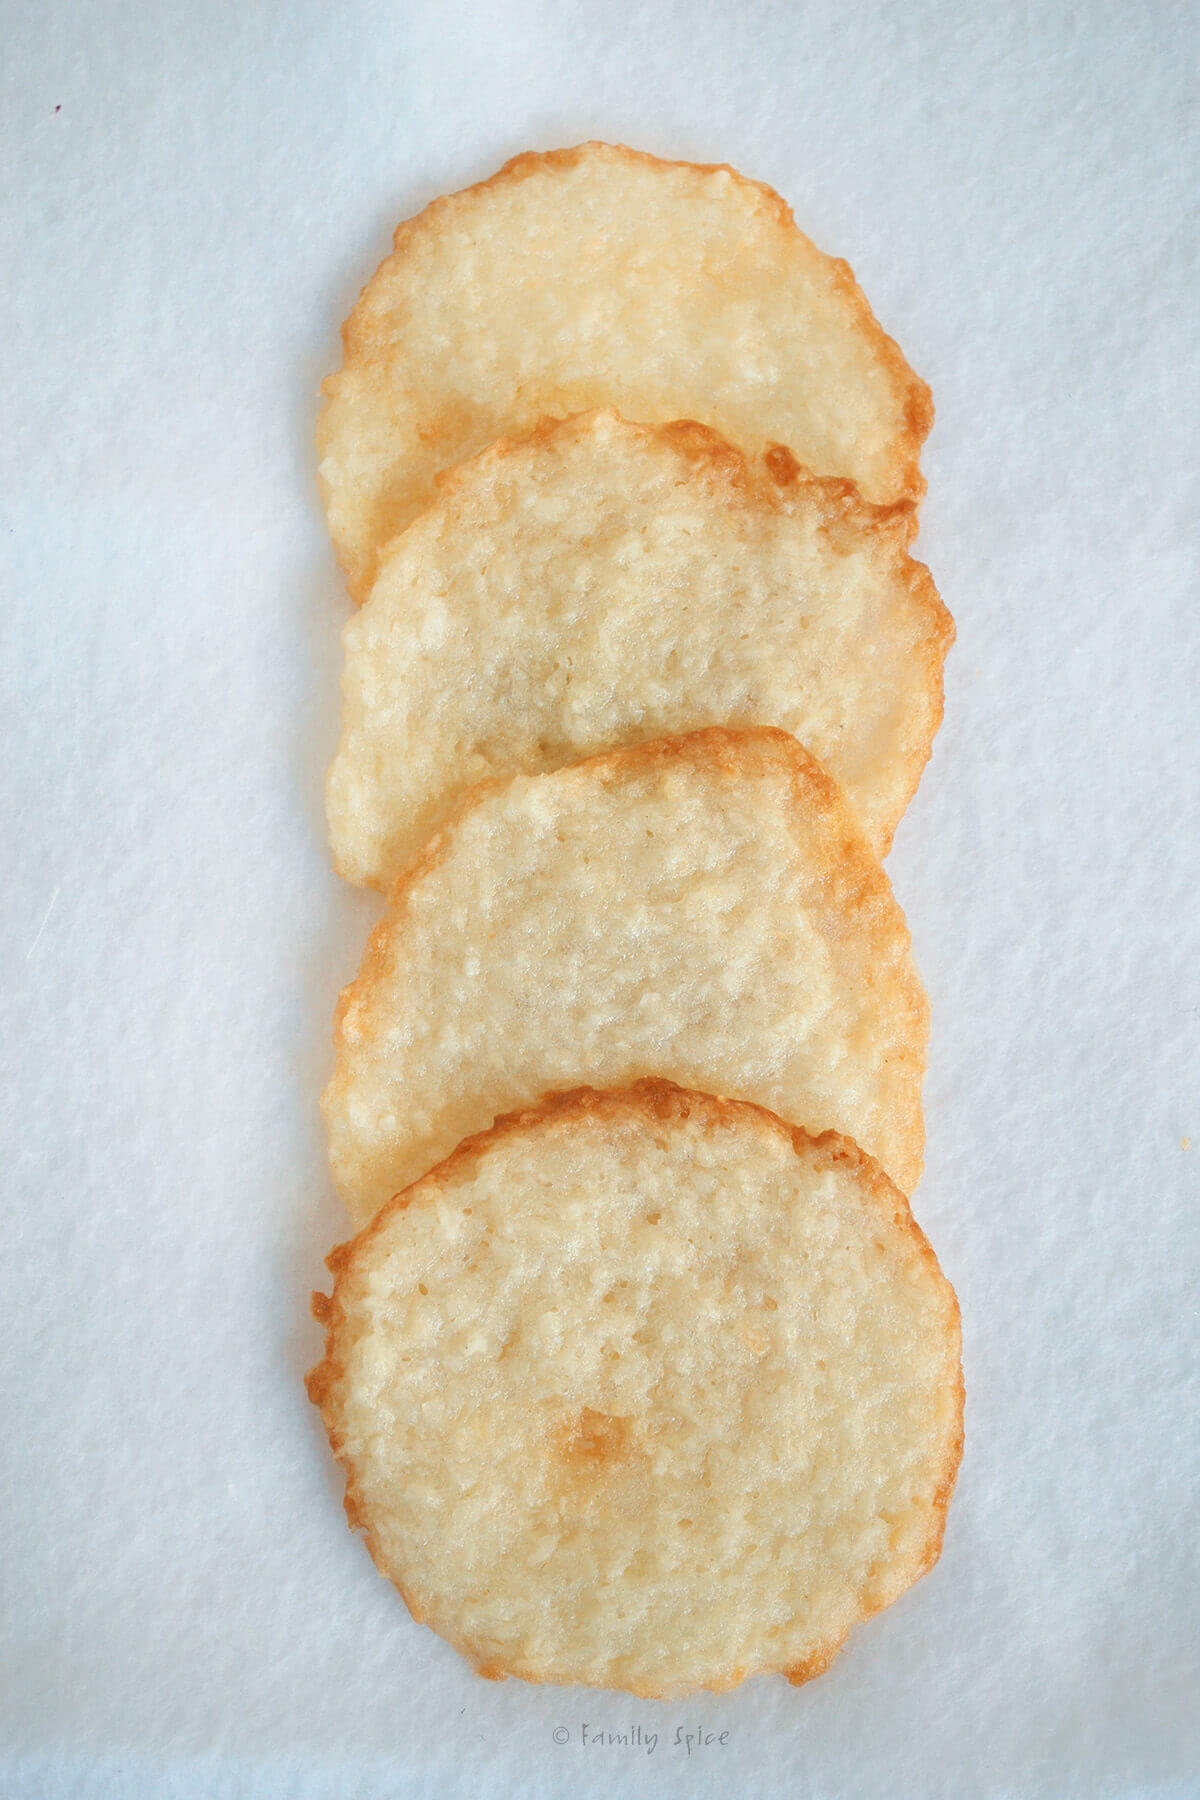 Top view of four coconut thin cookies on a white surface